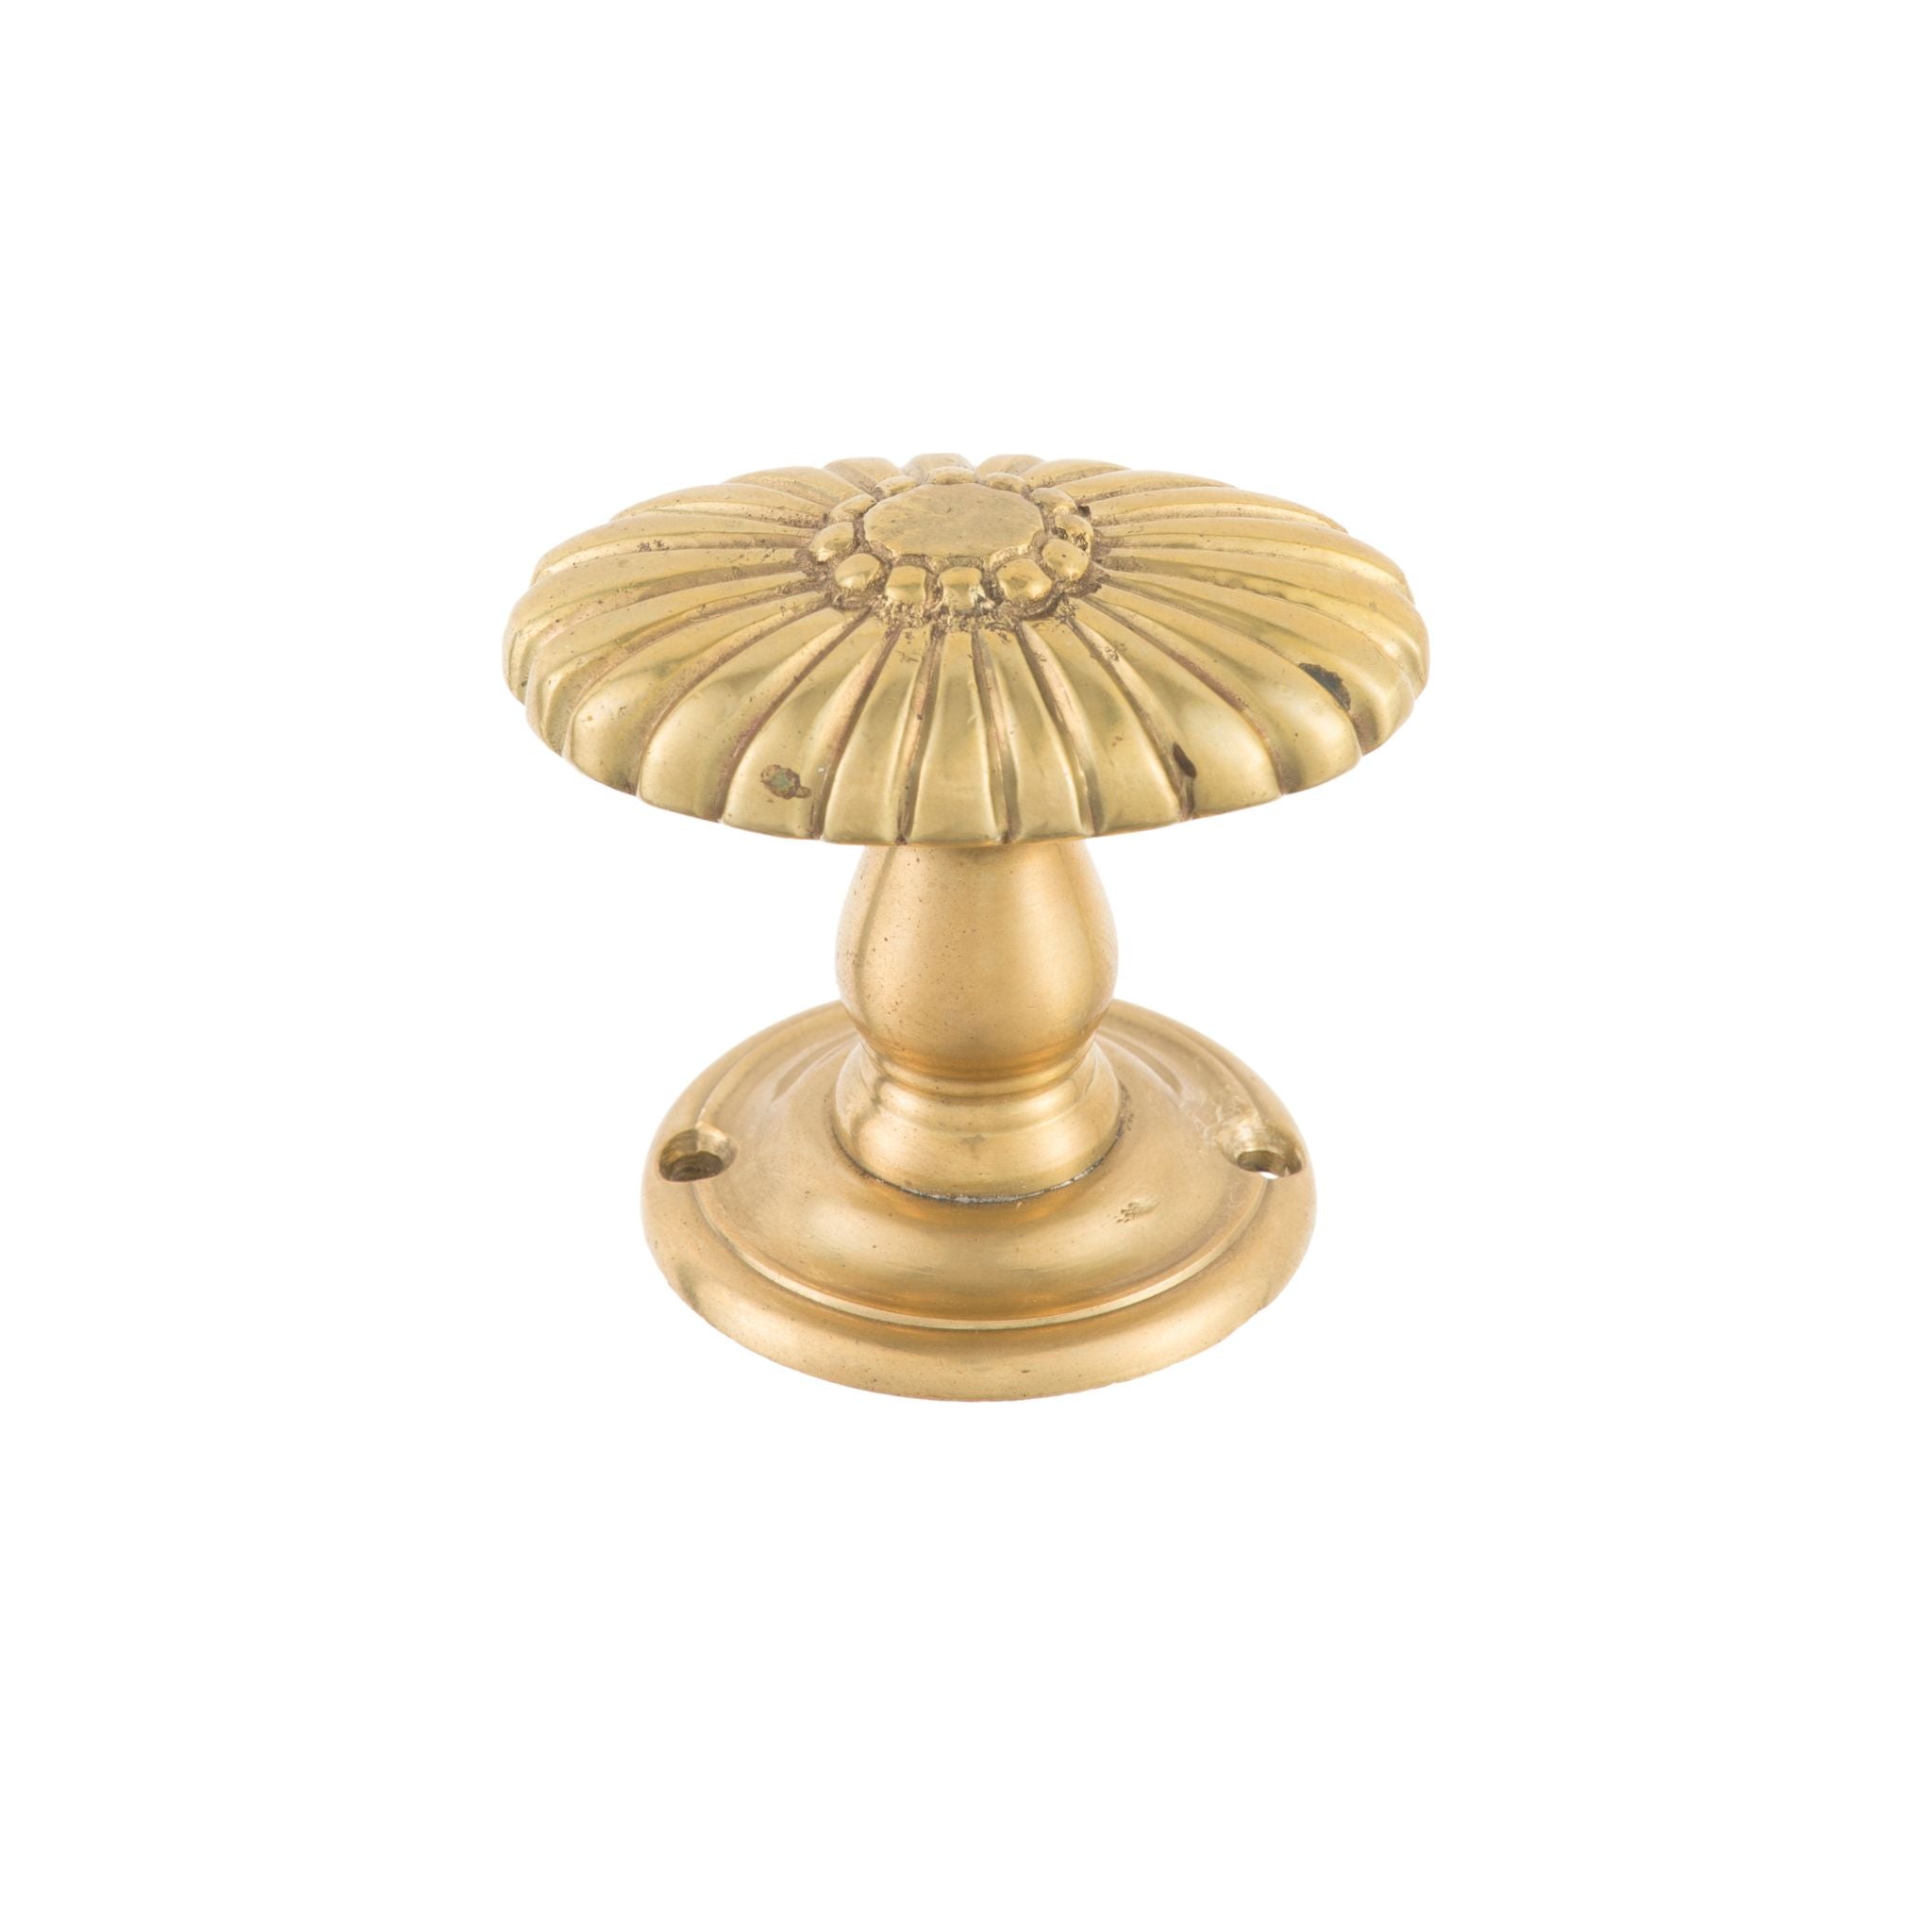 A polished brass knob with a classic design, suitable for cabinets, drawers, and doors.